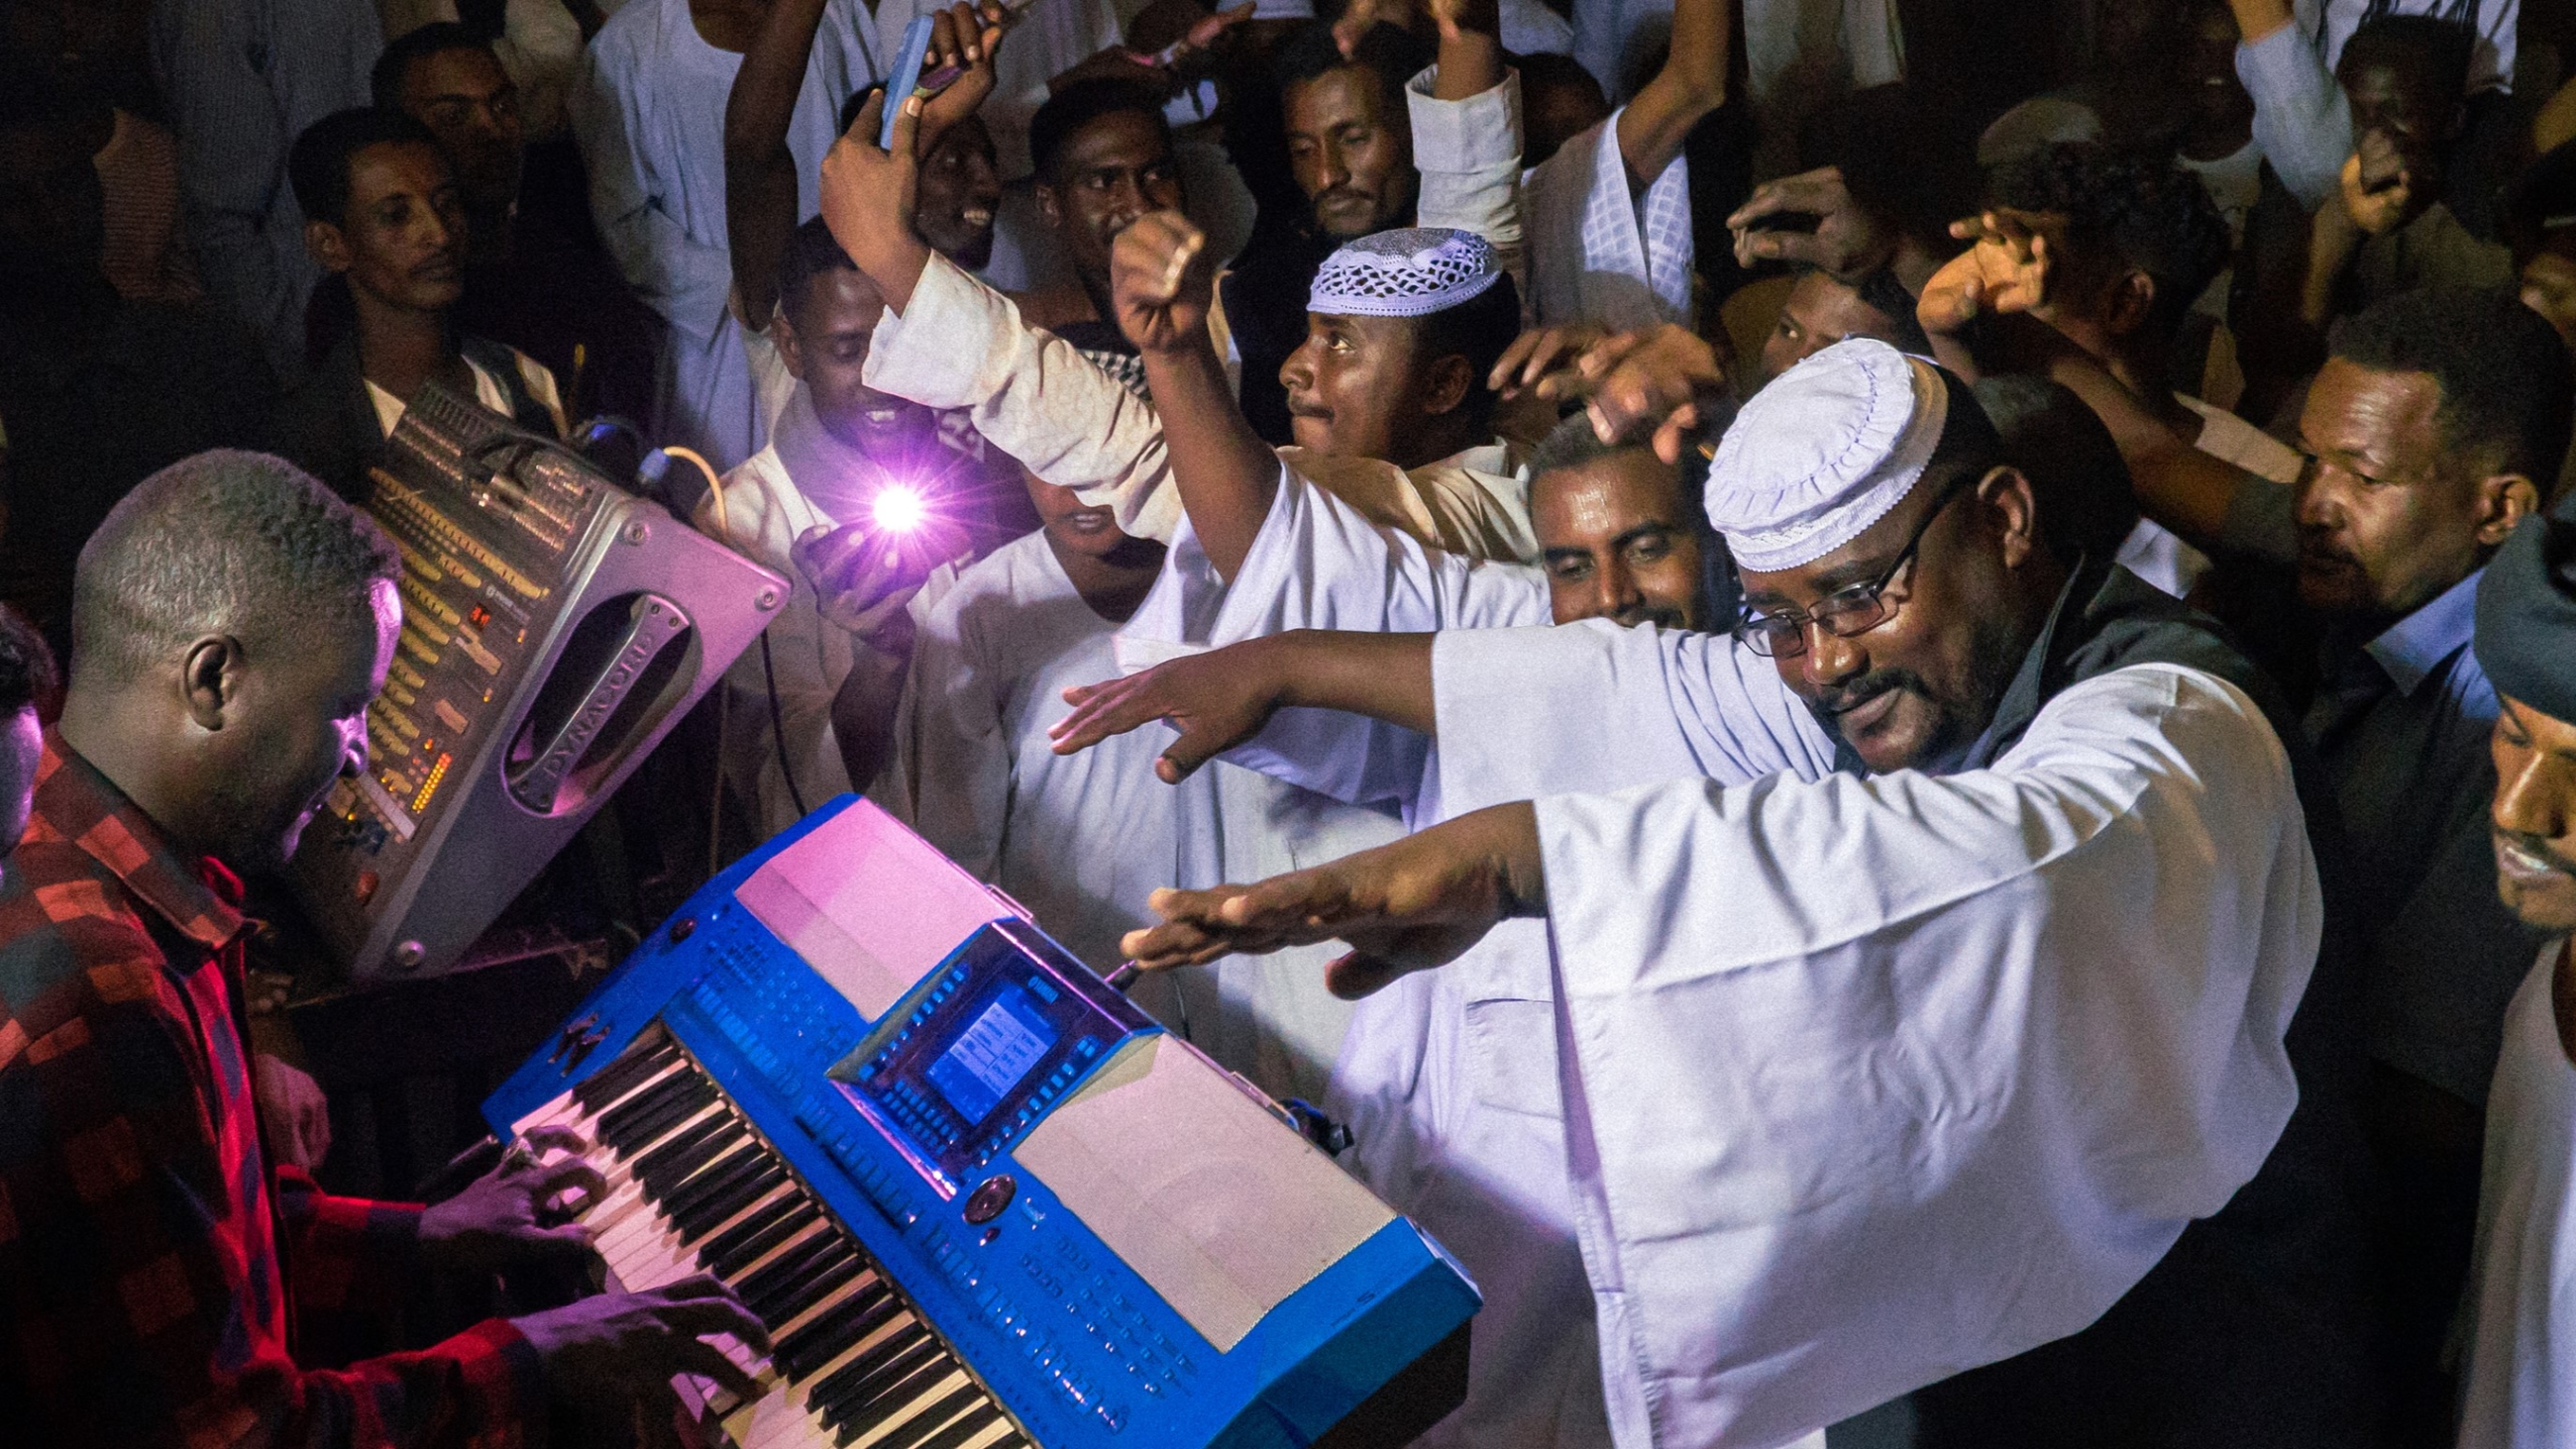 Sudanese men rave during a performance by Jantra